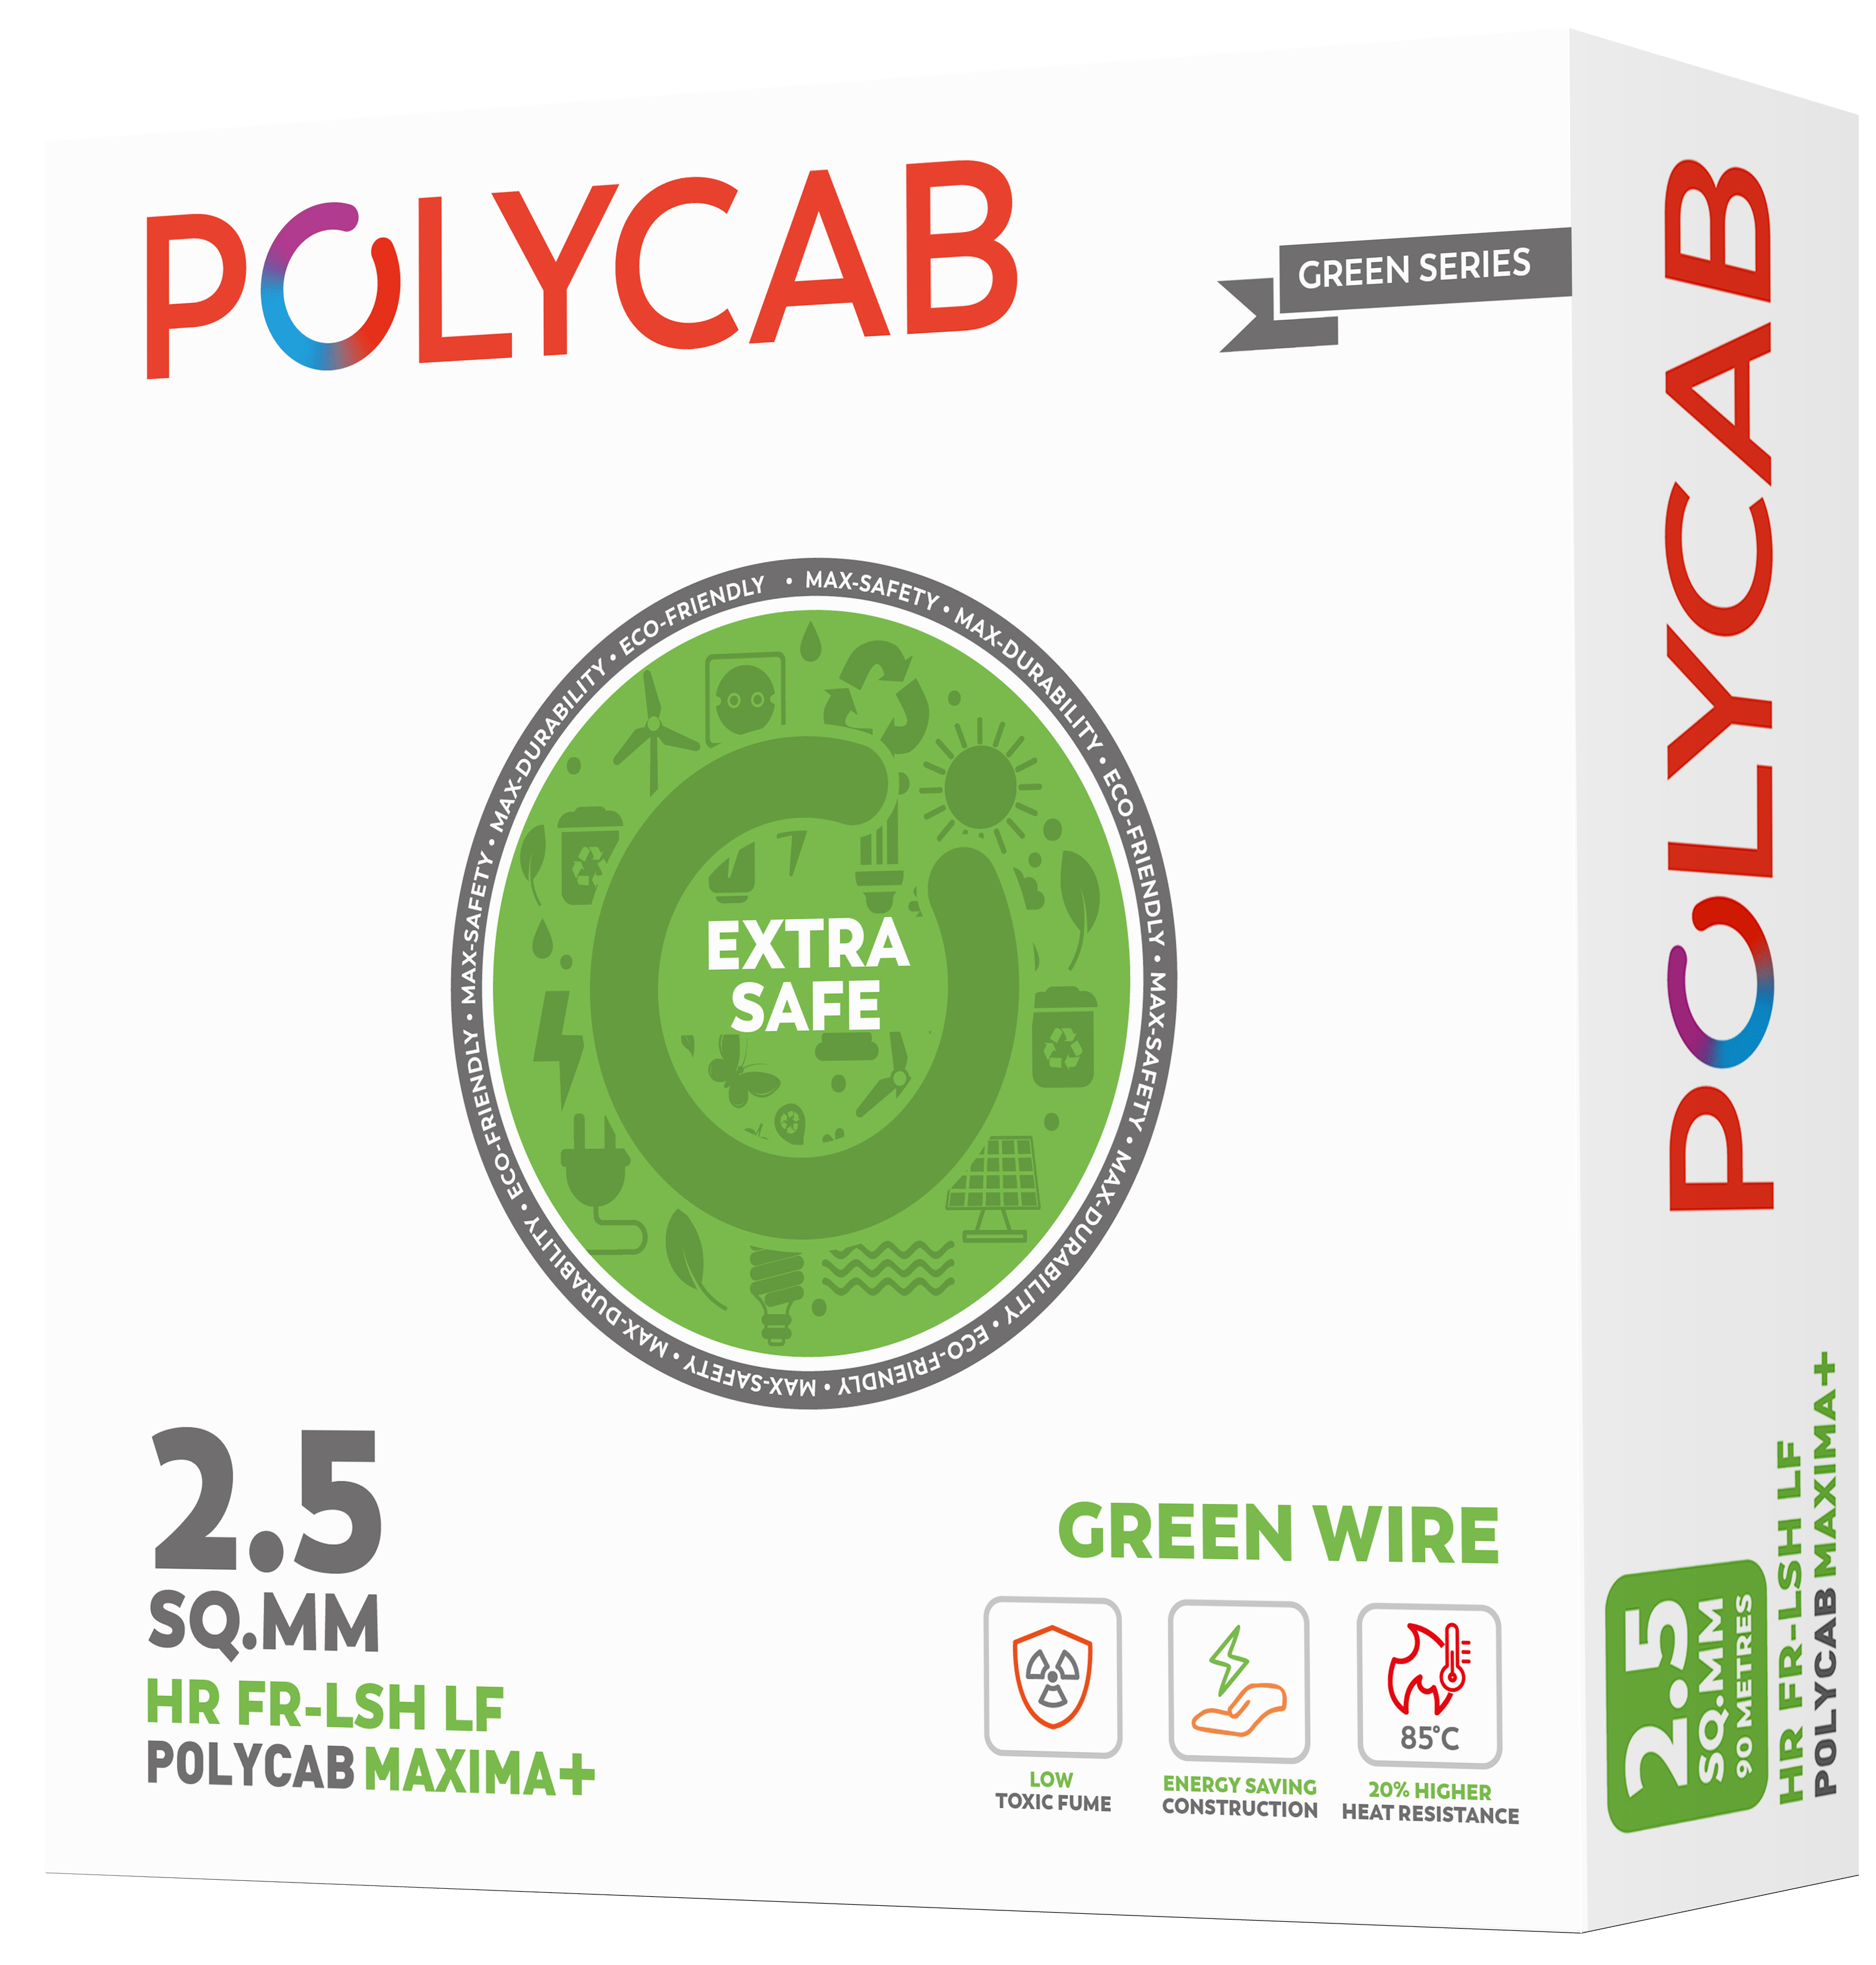 Polycab Wires 4.0 Sq. Mm. (90 Mtr.) – GREEN – HBR STORE